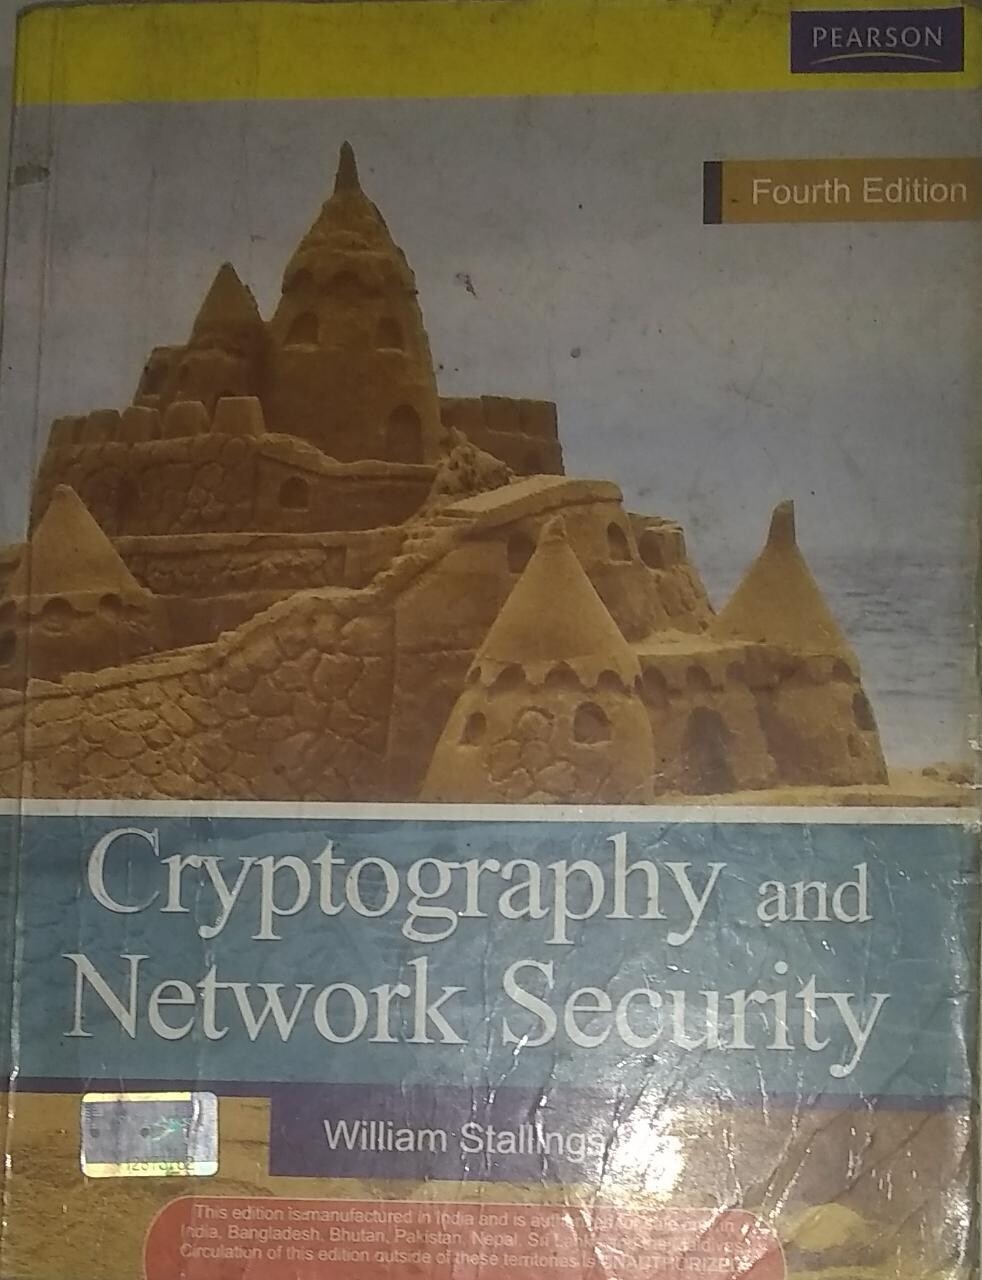 Cryptography And Network Security Principles And Practices 4Th Ed. by William Stallings